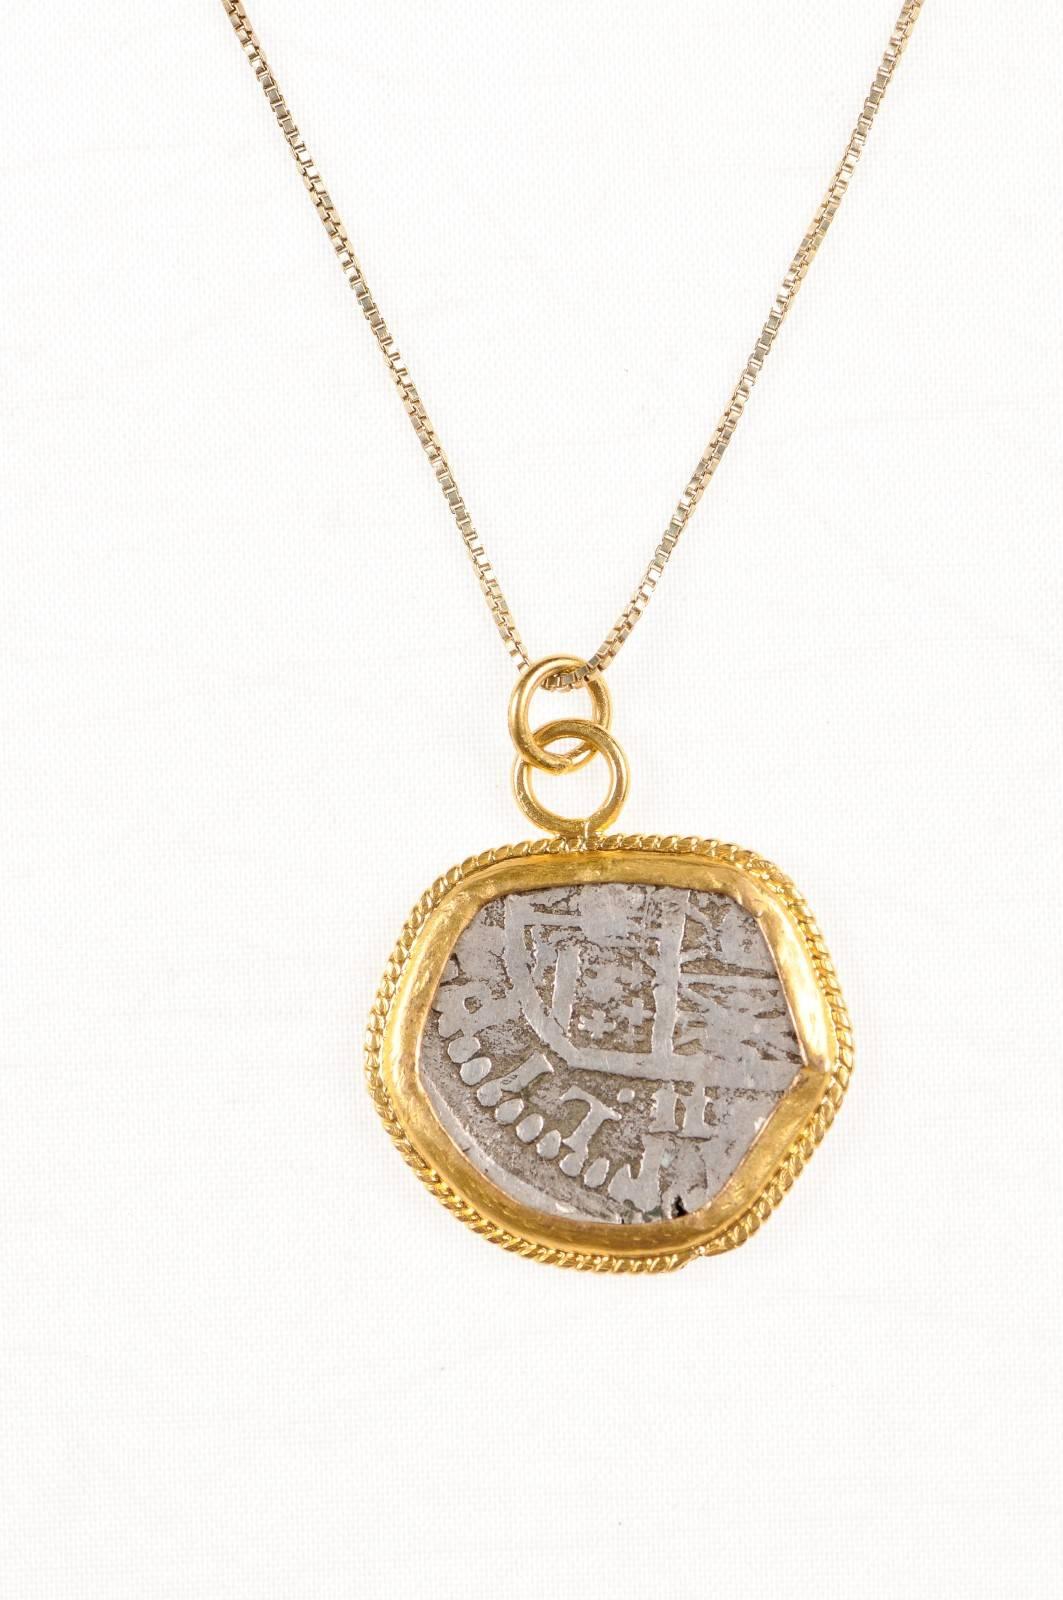 Spanish Silver Cob Coin circa 1500s Set in Rope Accented 22 Karat Gold Bezel For Sale 3